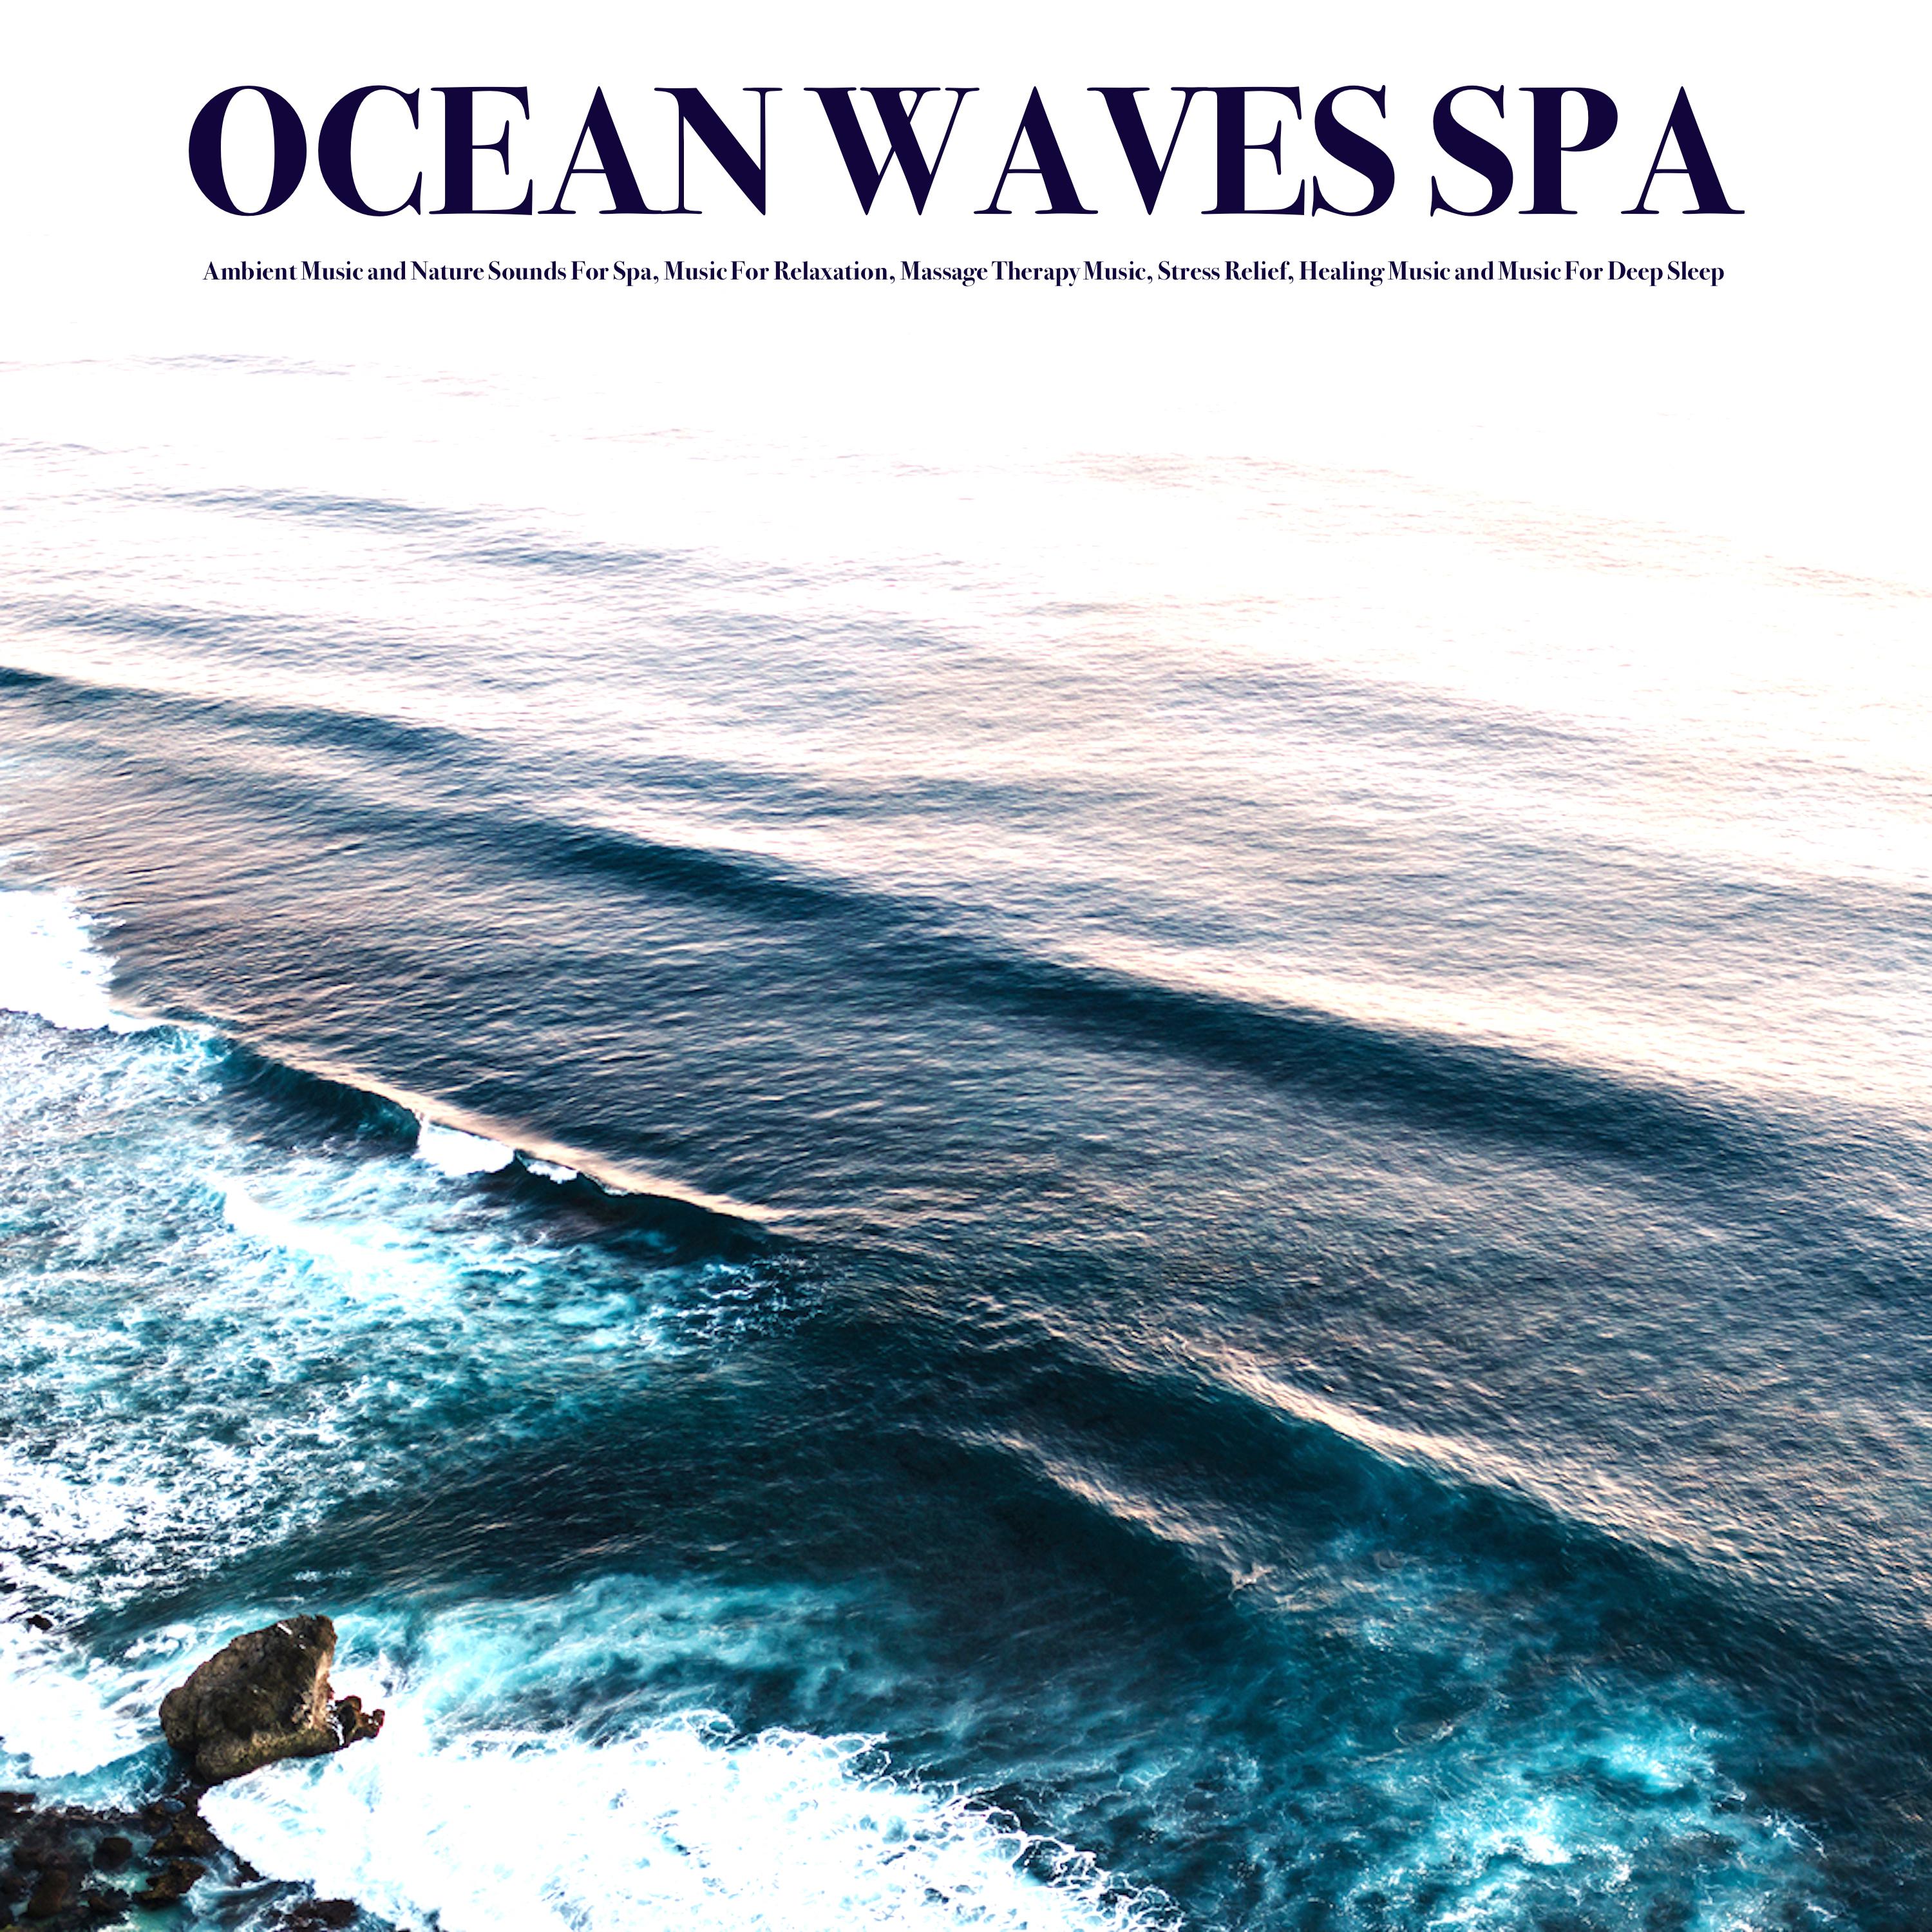 Ocean Waves Spa: Ambient Music and Nature Sounds For Spa, Music For Relaxation, Massage Therapy Music, Stress Relief, Healing Music and Music For Deep Sleep